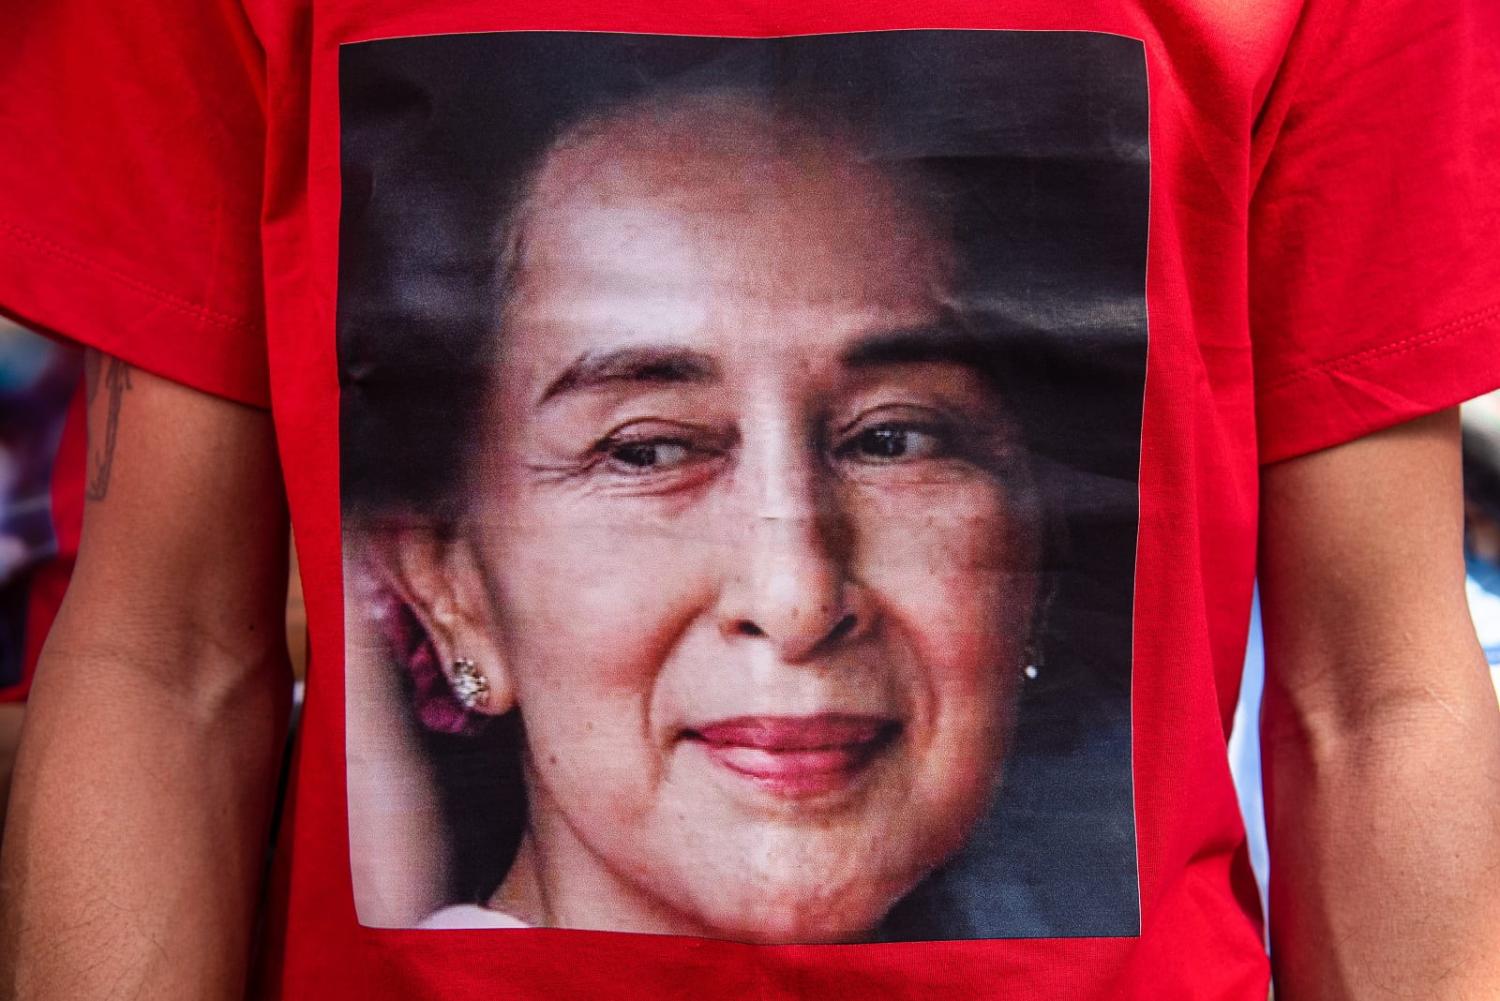 Many of Aung San Suu Kyi’s closest collaborators have condemned what they see as seriously flawed Western criticism of her policies (Peerapon Boonyakiat/SOPA Images/LightRocket via Getty Images)